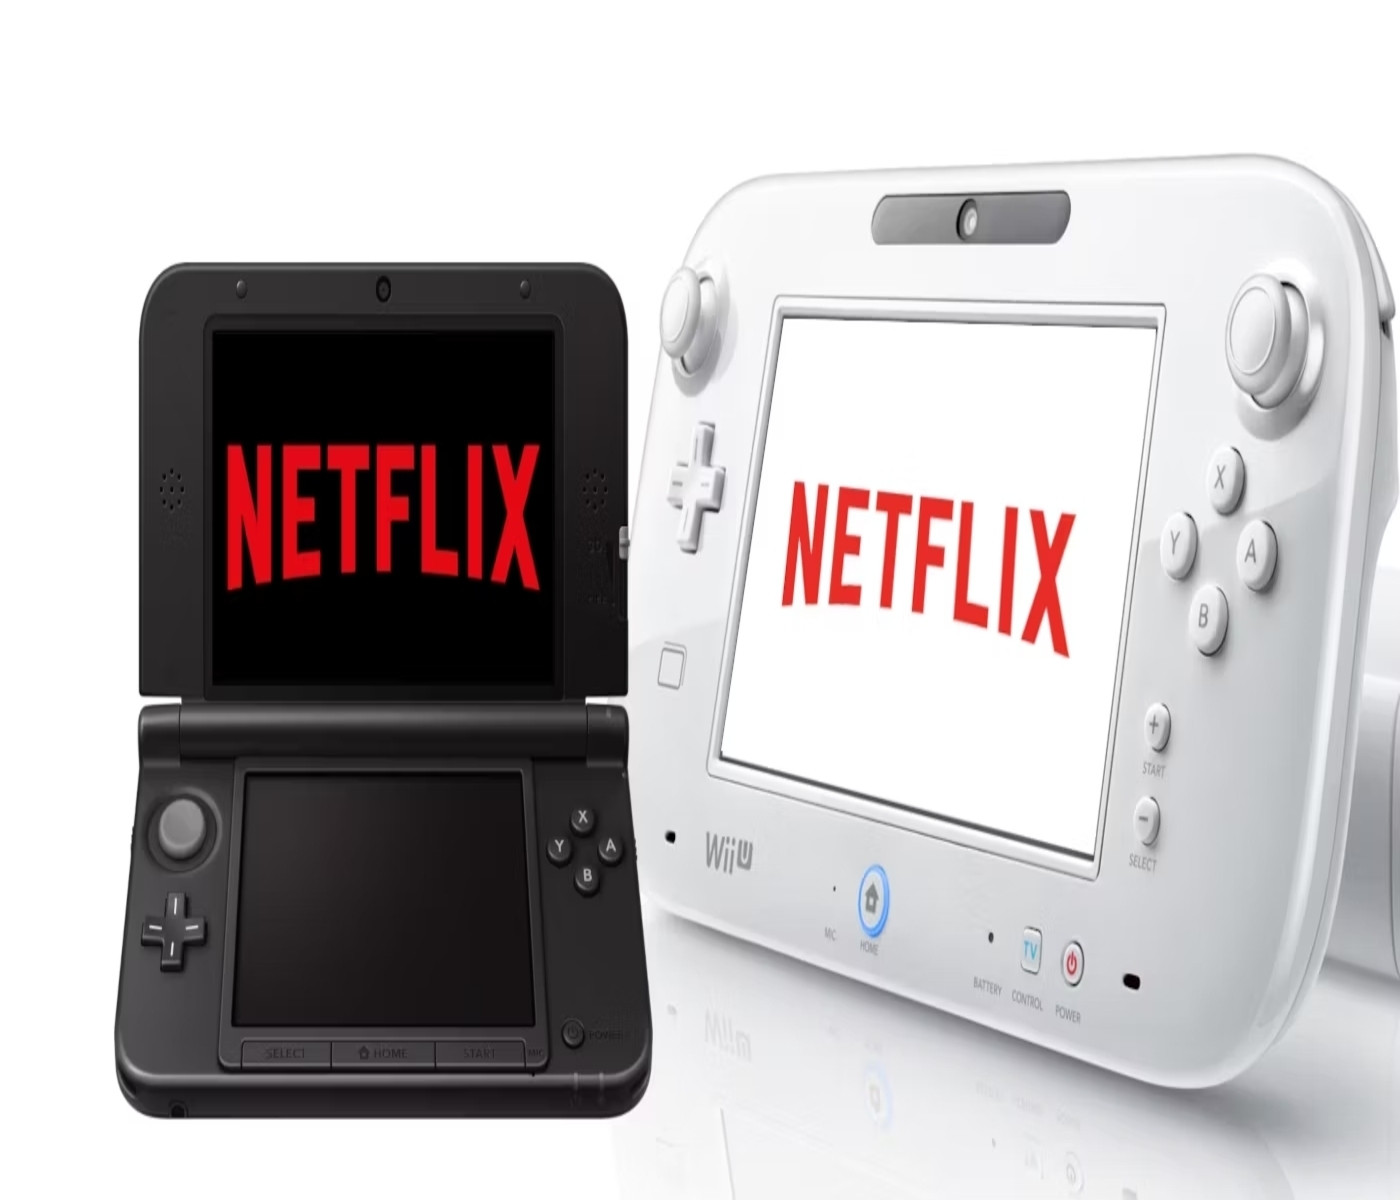 How To Log Out Of Netflix On Wii U